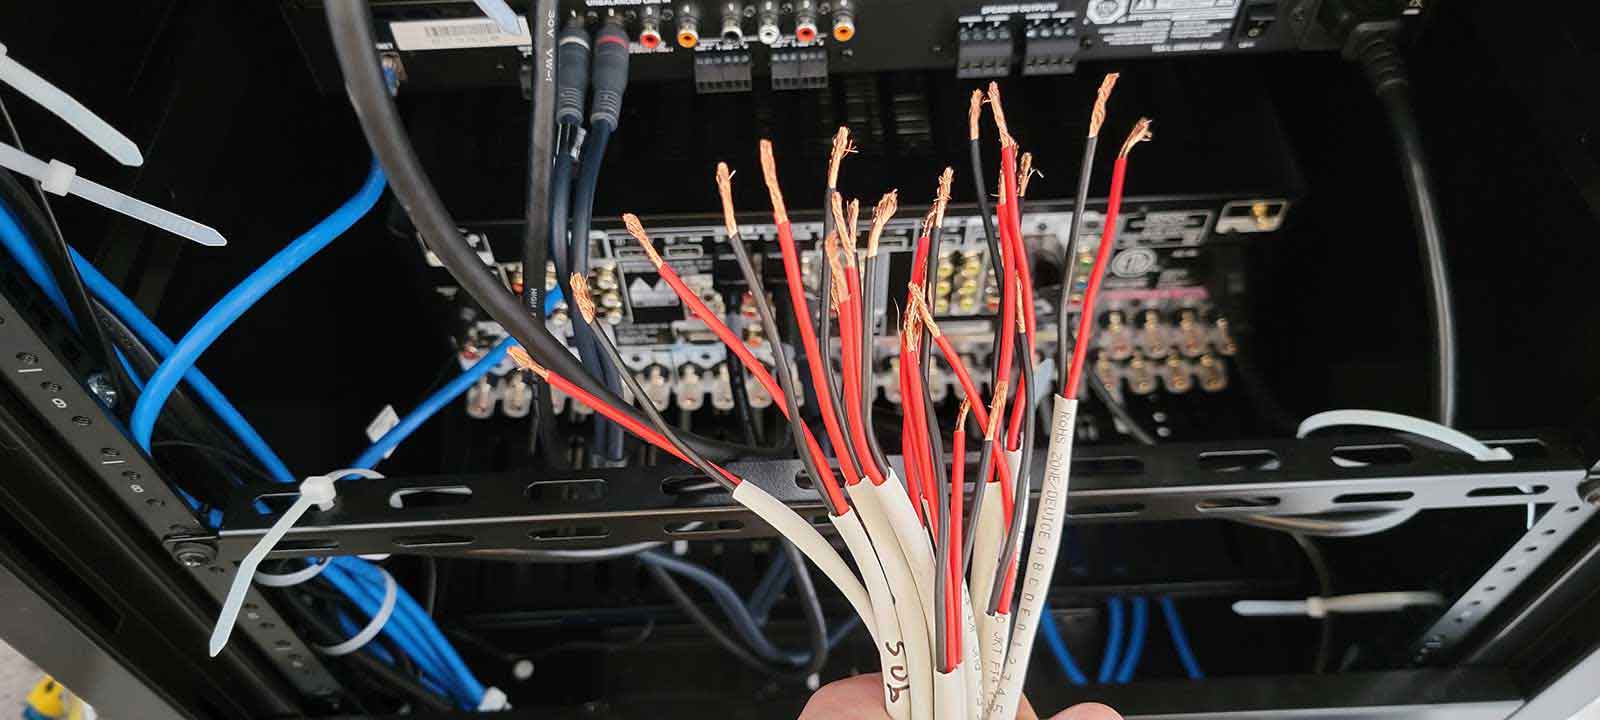 Home Theater Connections & Cable Management